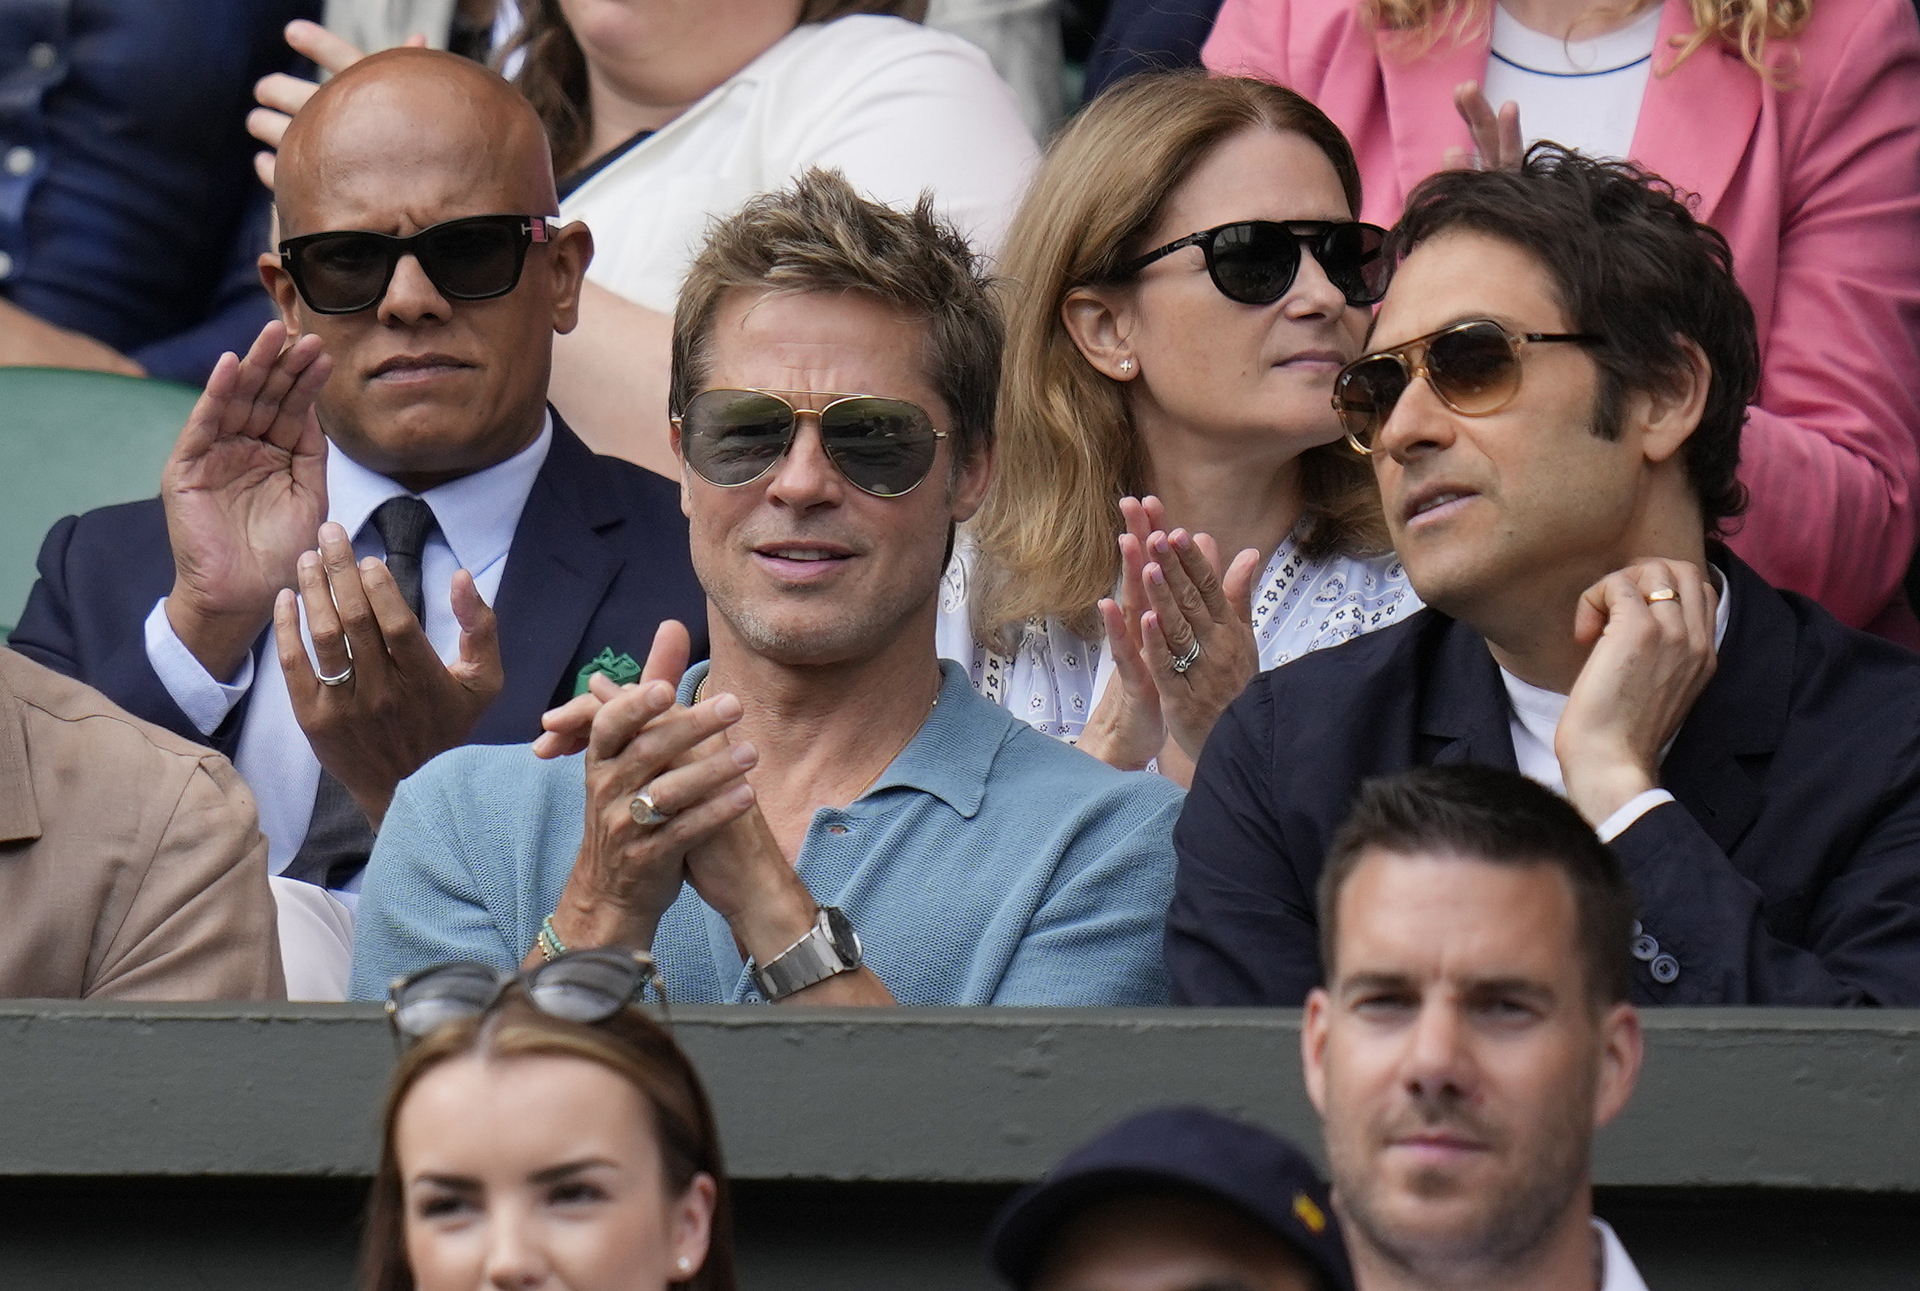 Actor Brad Pitt sits in the stands at Center Court in the men's singles final between Spaniard Carlos Alcaraz and Serb Novak Djokovic on the fourteenth day of the Wimbledon Tennis Championships in London, Sunday, July 16, 2023.  (AP Photo/Kirsty Wigglesworth) Associated Press/LaPresse Italy and Spain only